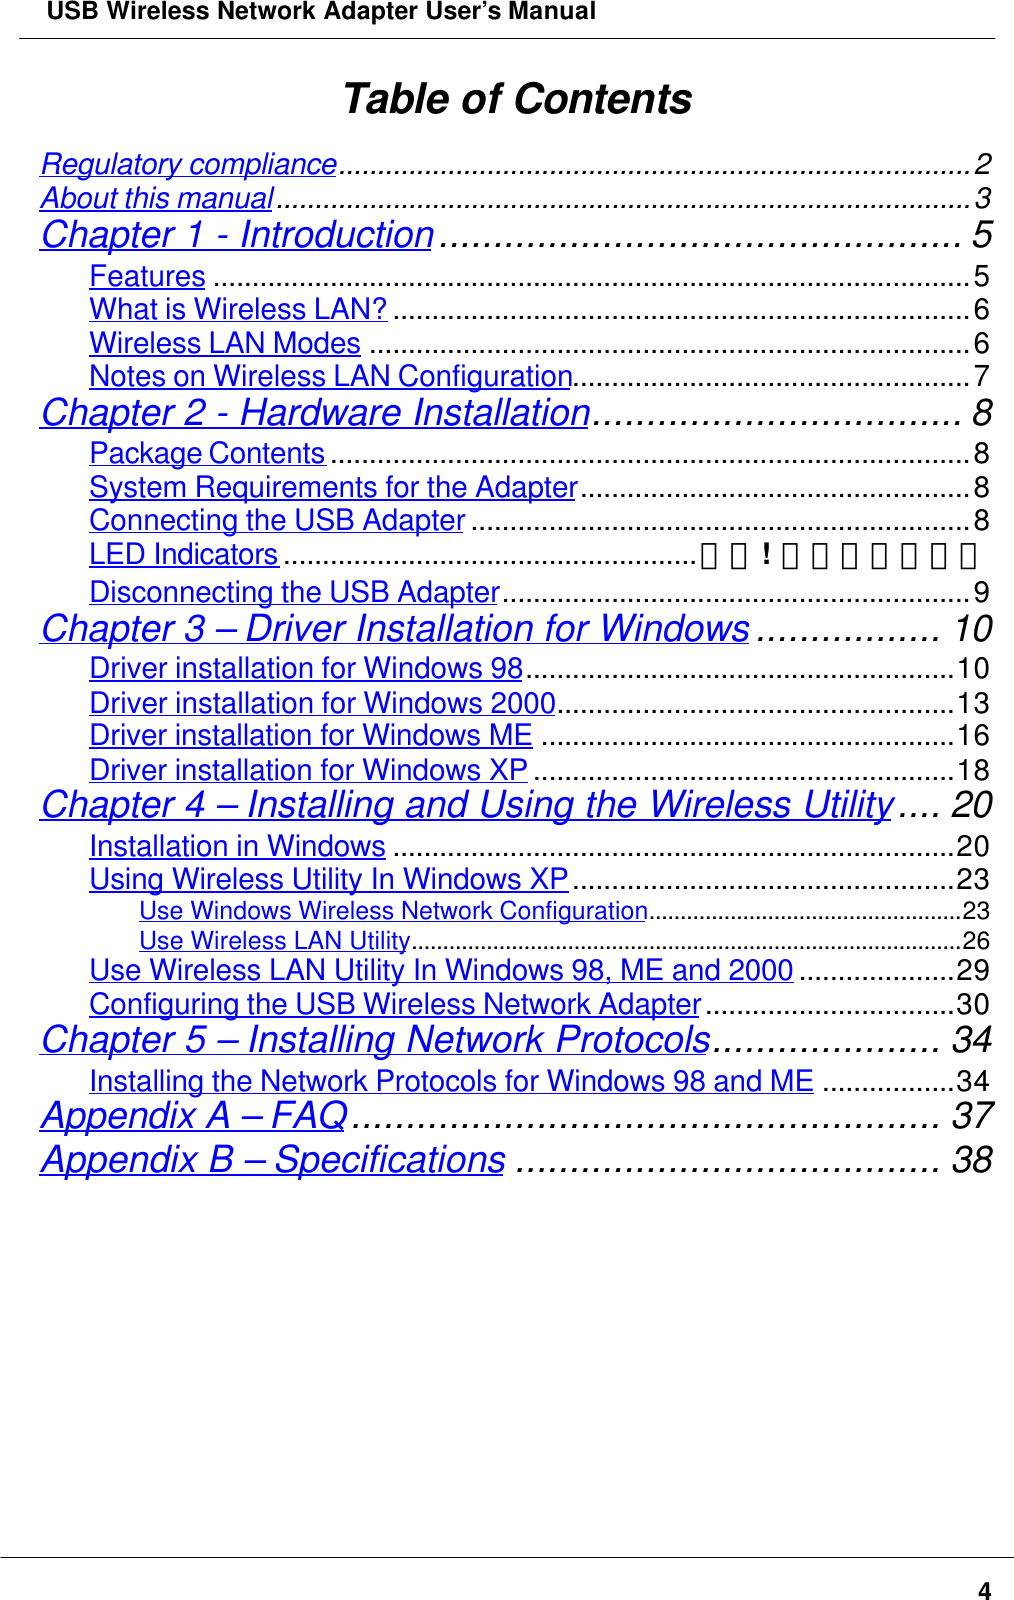  USB Wireless Network Adapter User’s Manual4Table of ContentsRegulatory compliance.................................................................................2About this manual.........................................................................................3Chapter 1 - Introduction................................................ 5Features .................................................................................................5What is Wireless LAN? ..........................................................................6Wireless LAN Modes .............................................................................6Notes on Wireless LAN Configuration...................................................7Chapter 2 - Hardware Installation.................................. 8Package Contents ..................................................................................8System Requirements for the Adapter..................................................8Connecting the USB Adapter ................................................................8LED Indicators .....................................................錯誤!  尚未定義書籤。Disconnecting the USB Adapter............................................................9Chapter 3 – Driver Installation for Windows ................. 10Driver installation for Windows 98.......................................................10Driver installation for Windows 2000...................................................13Driver installation for Windows ME .....................................................16Driver installation for Windows XP ......................................................18Chapter 4 – Installing and Using the Wireless Utility.... 20Installation in Windows ........................................................................20Using Wireless Utility In Windows XP.................................................23Use Windows Wireless Network Configuration..................................................23Use Wireless LAN Utility........................................................................................26Use Wireless LAN Utility In Windows 98, ME and 2000 ....................29Configuring the USB Wireless Network Adapter................................30Chapter 5 – Installing Network Protocols..................... 34Installing the Network Protocols for Windows 98 and ME .................34Appendix A – FAQ...................................................... 37Appendix B – Specifications ....................................... 38